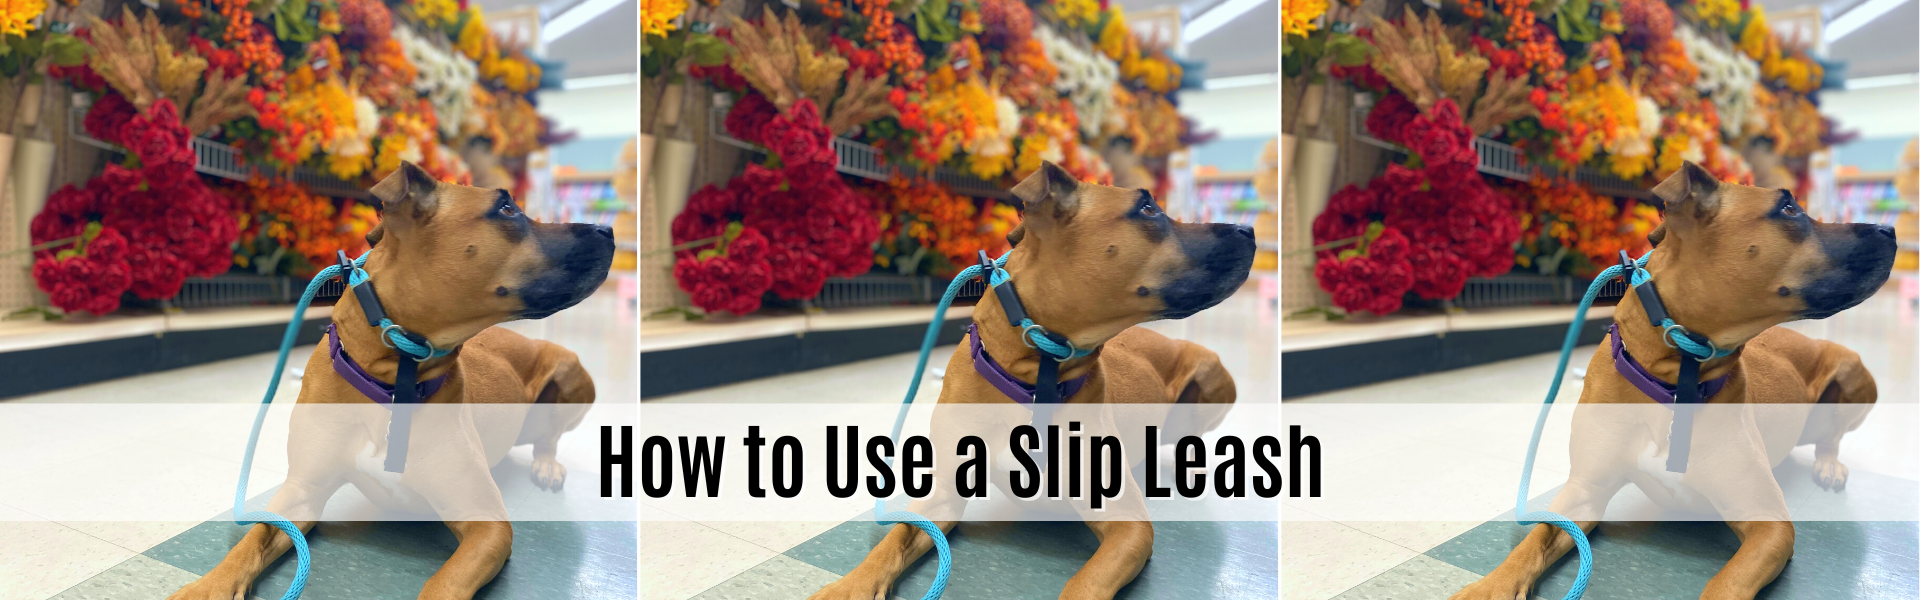 how to use a slip leash